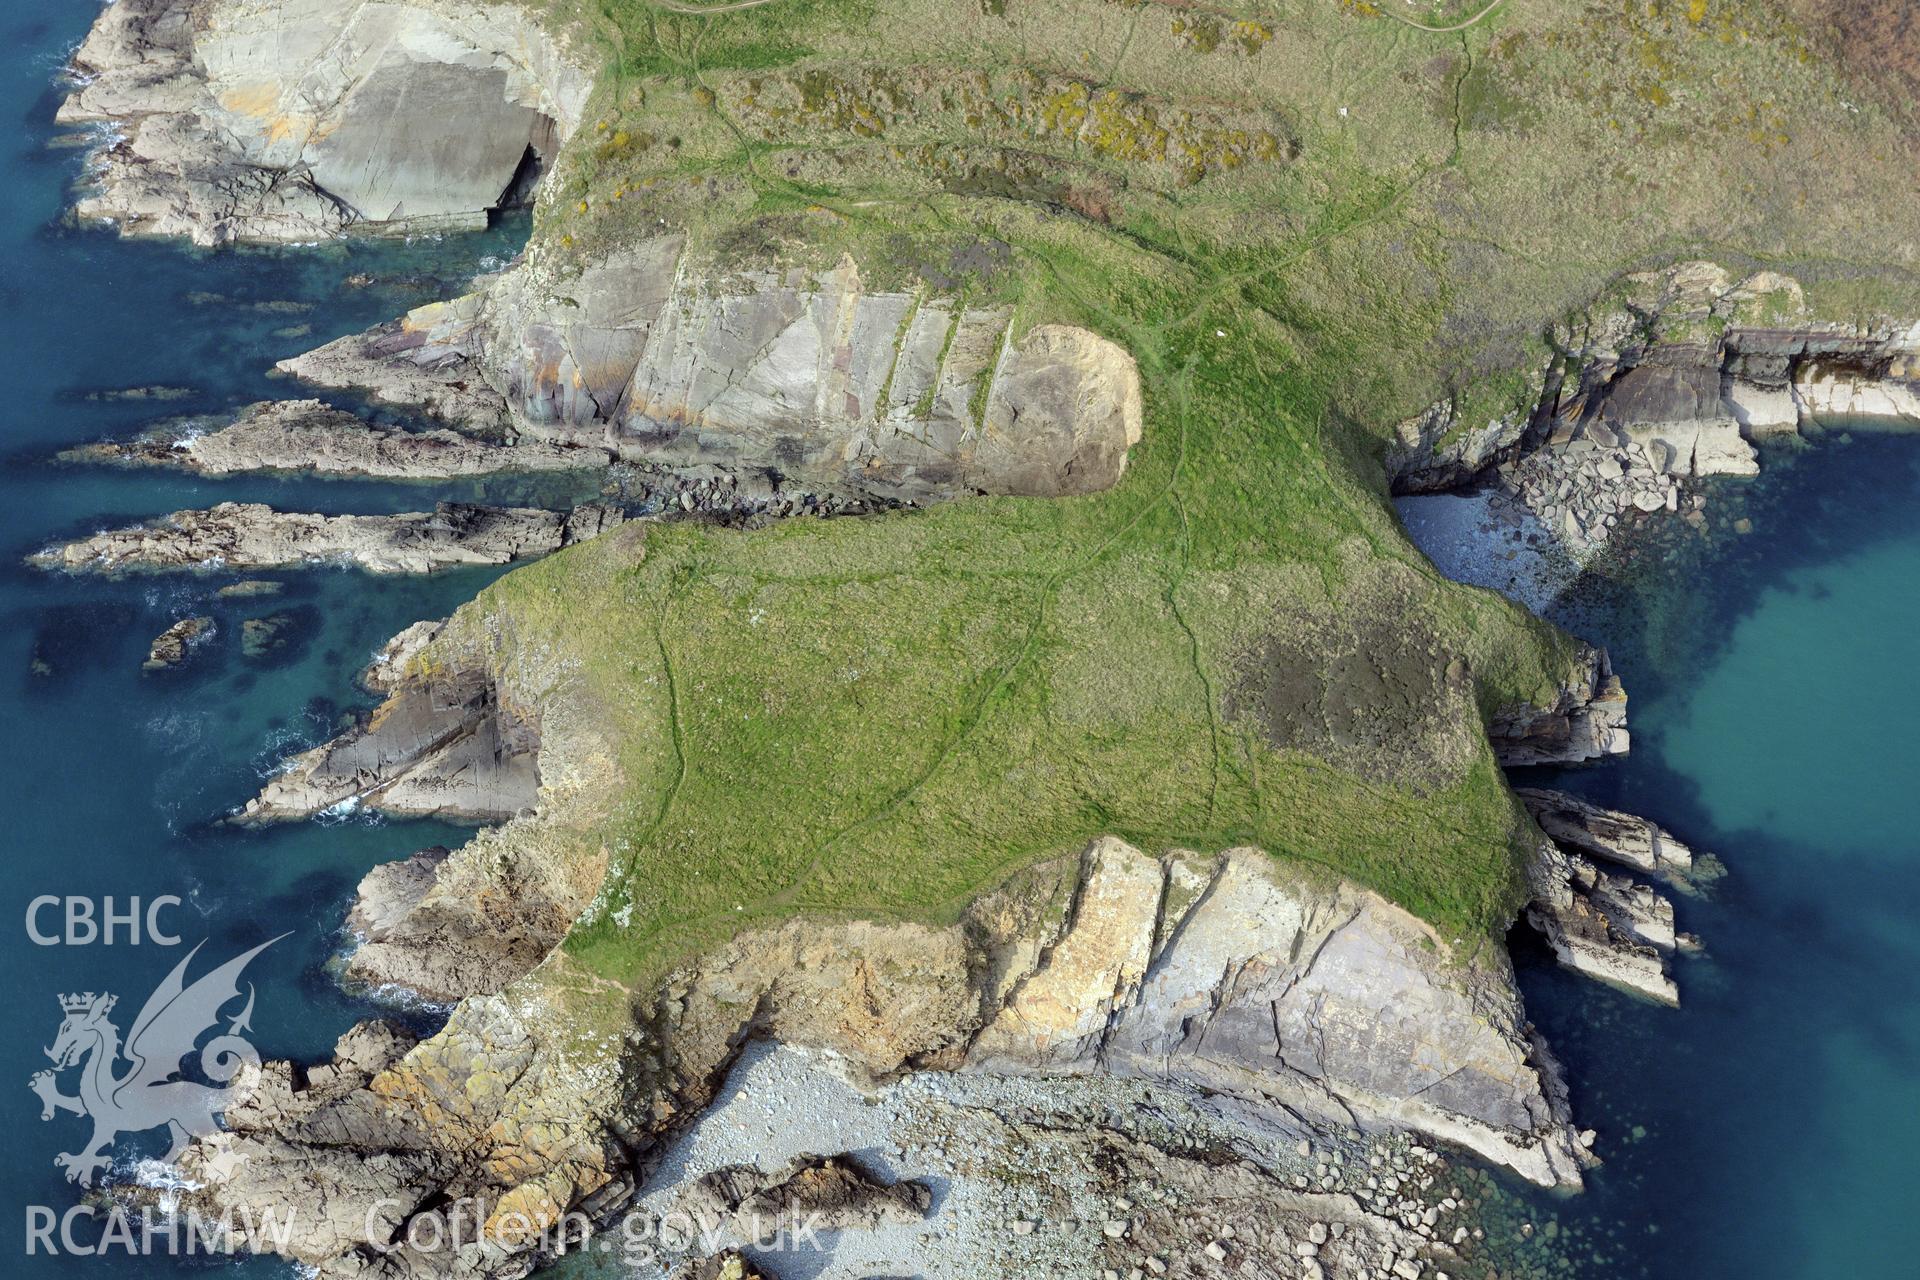 Aerial photography of Penpleidiau promontory fort taken on 27th March 2017. Baseline aerial reconnaissance survey for the CHERISH Project. ? Crown: CHERISH PROJECT 2017. Produced with EU funds through the Ireland Wales Co-operation Programme 2014-2020. All material made freely available through the Open Government Licence.